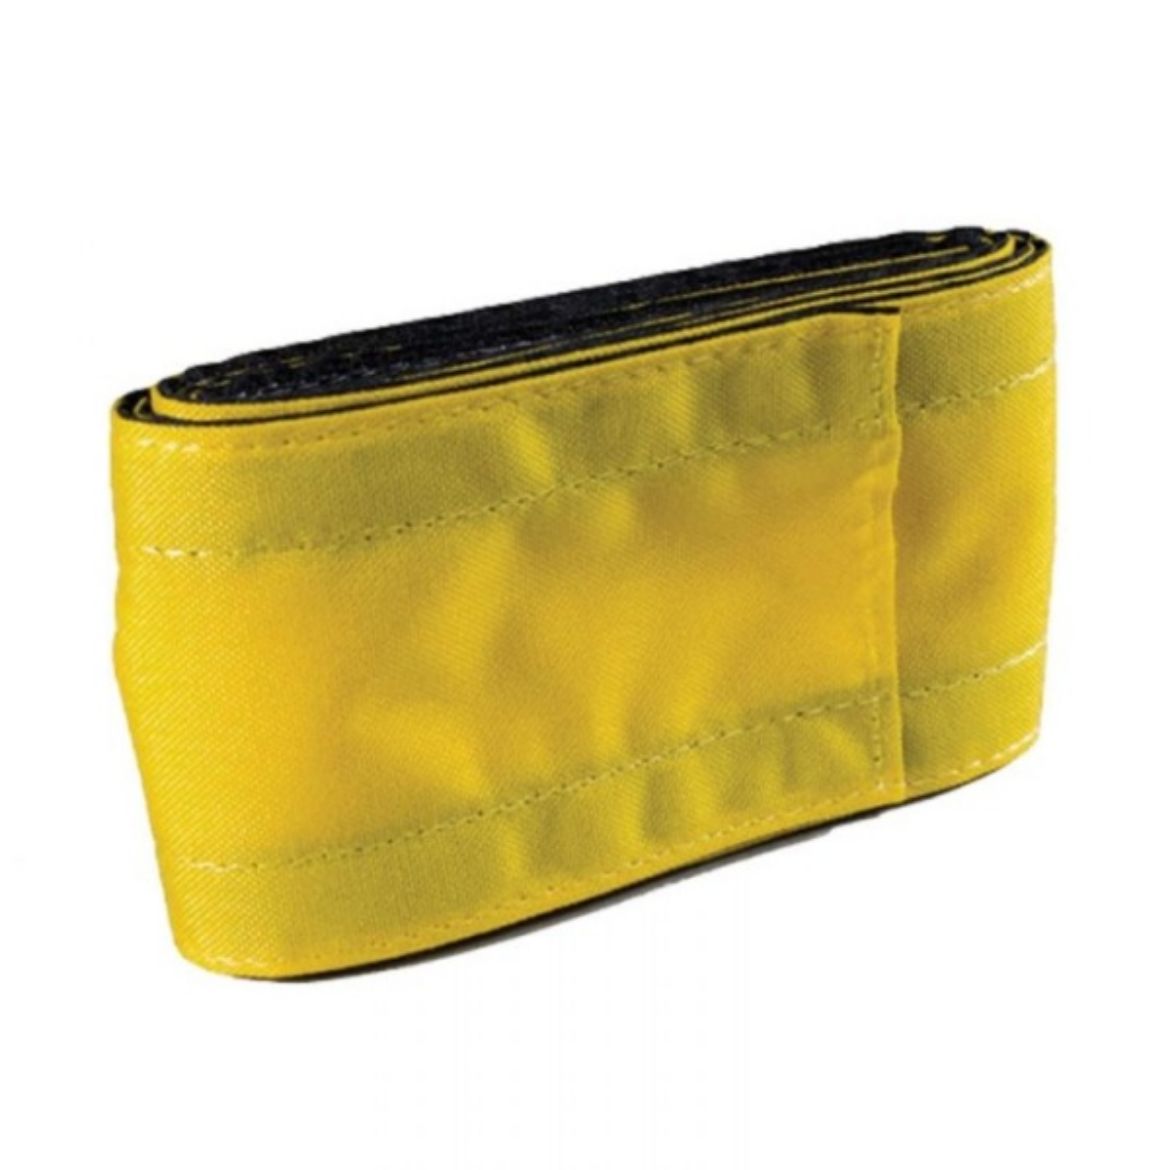 Picture of SAFCORD TRIP PREVENTION DEVICE YELLOW - 100MMX1.8M